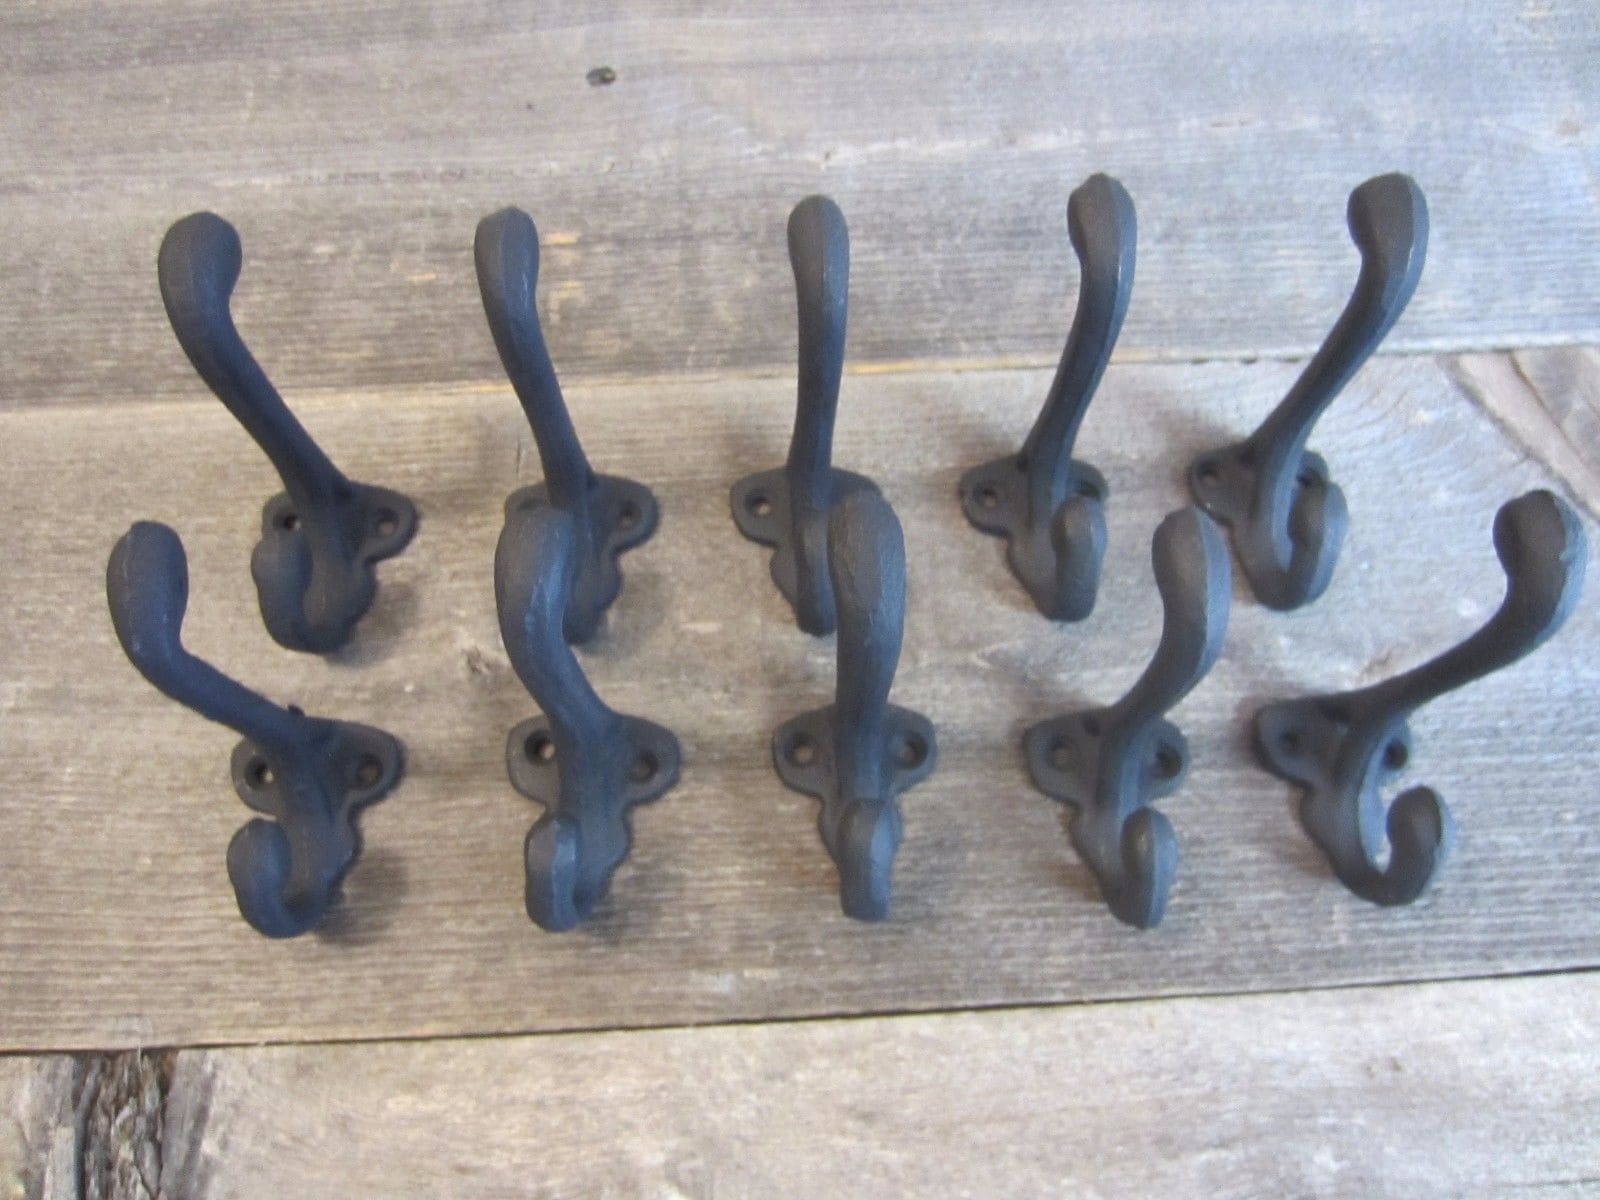 A row of black iron hooks on a wooden surface.